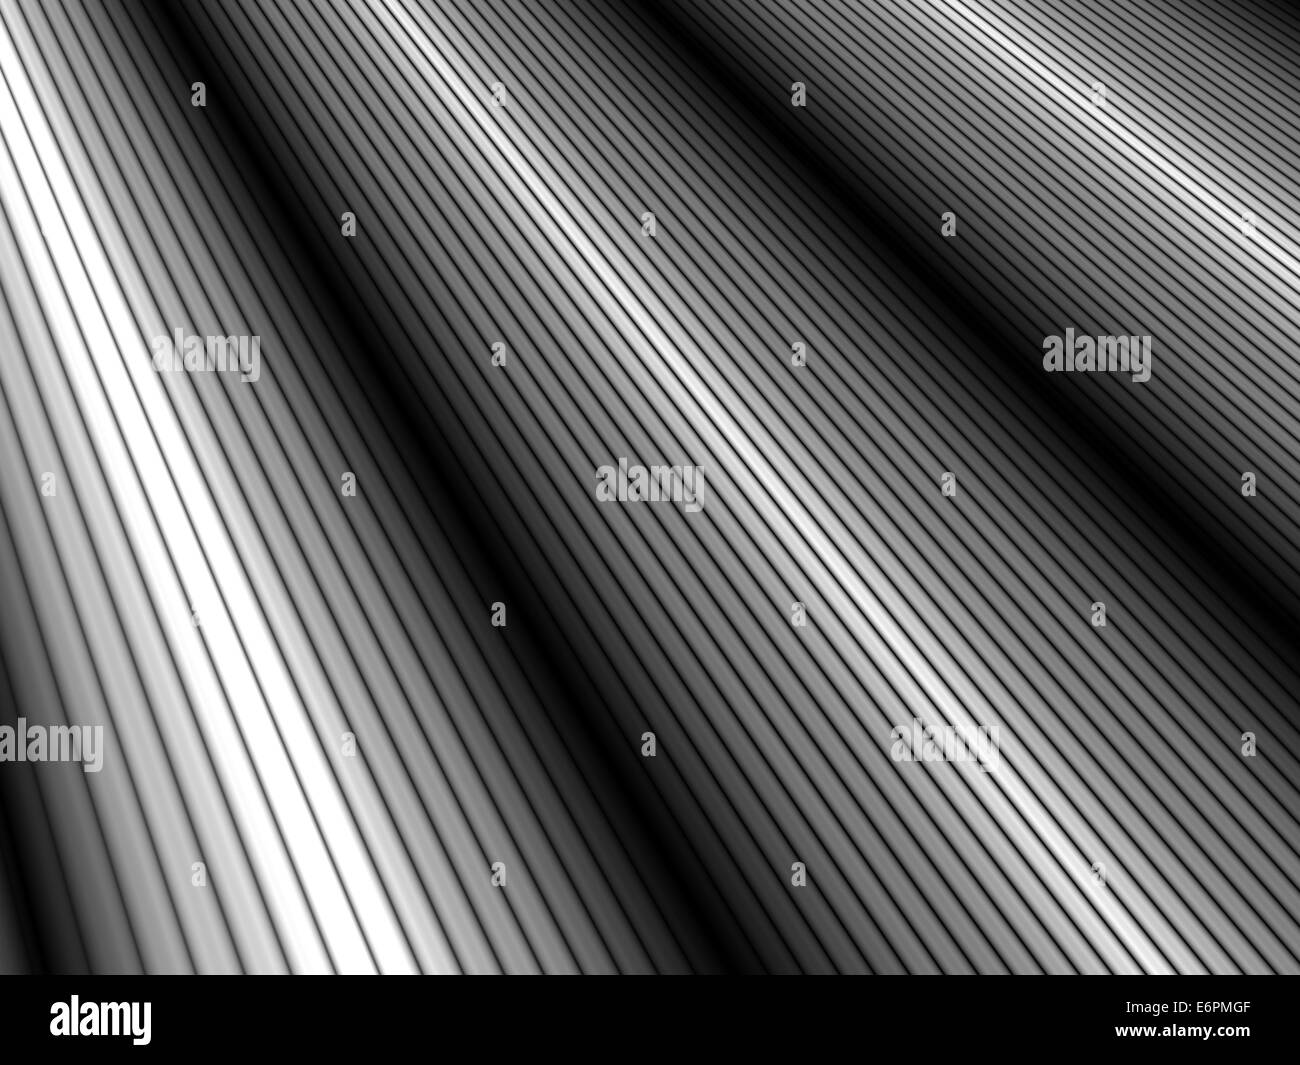 Abstract background scylinders steel pipe manufacturing construction industry Stock Photo